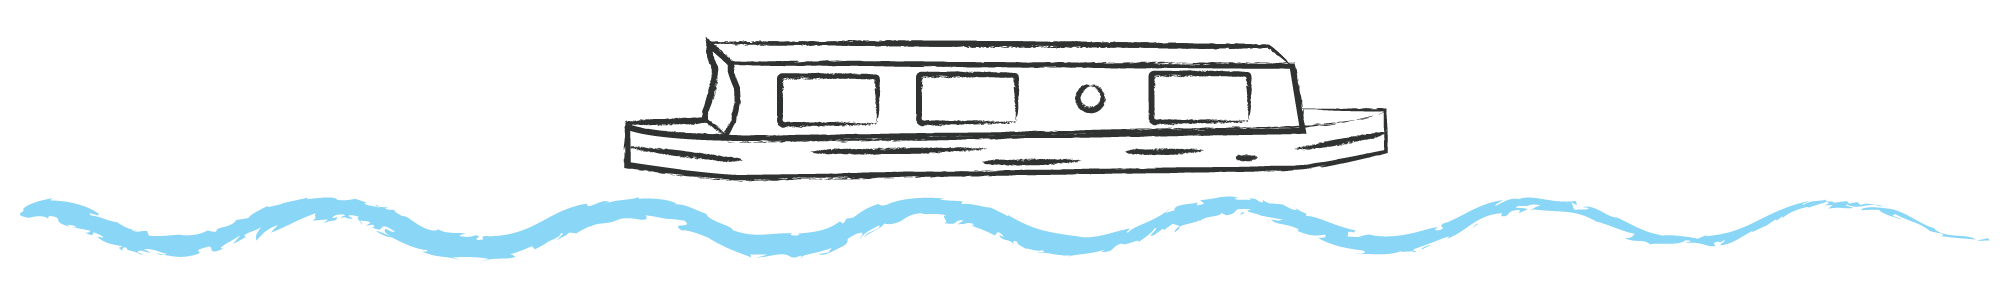 Illustration of the All Aboard canal boat on water